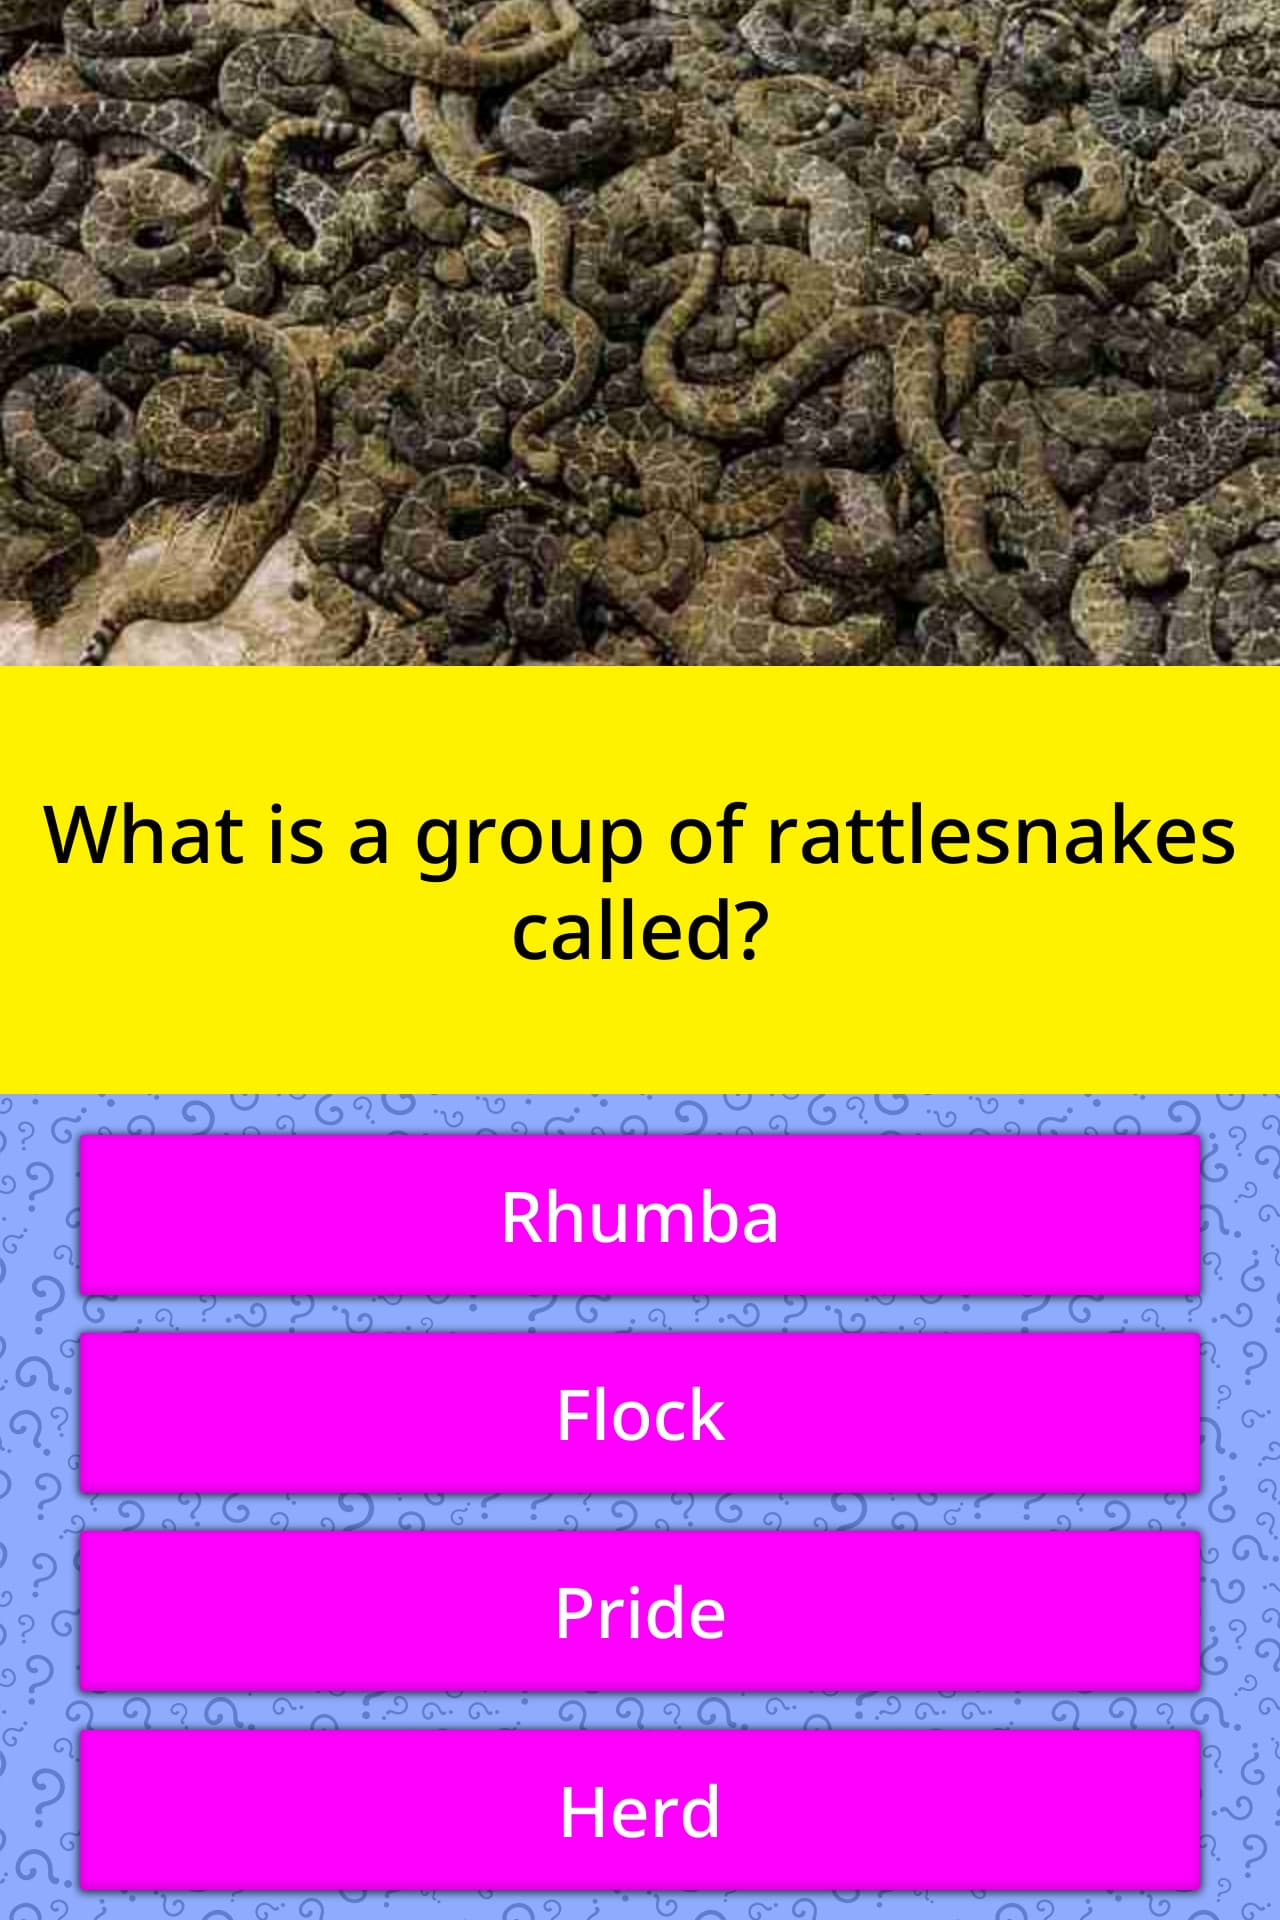 What is a group of rattlesnakes called?